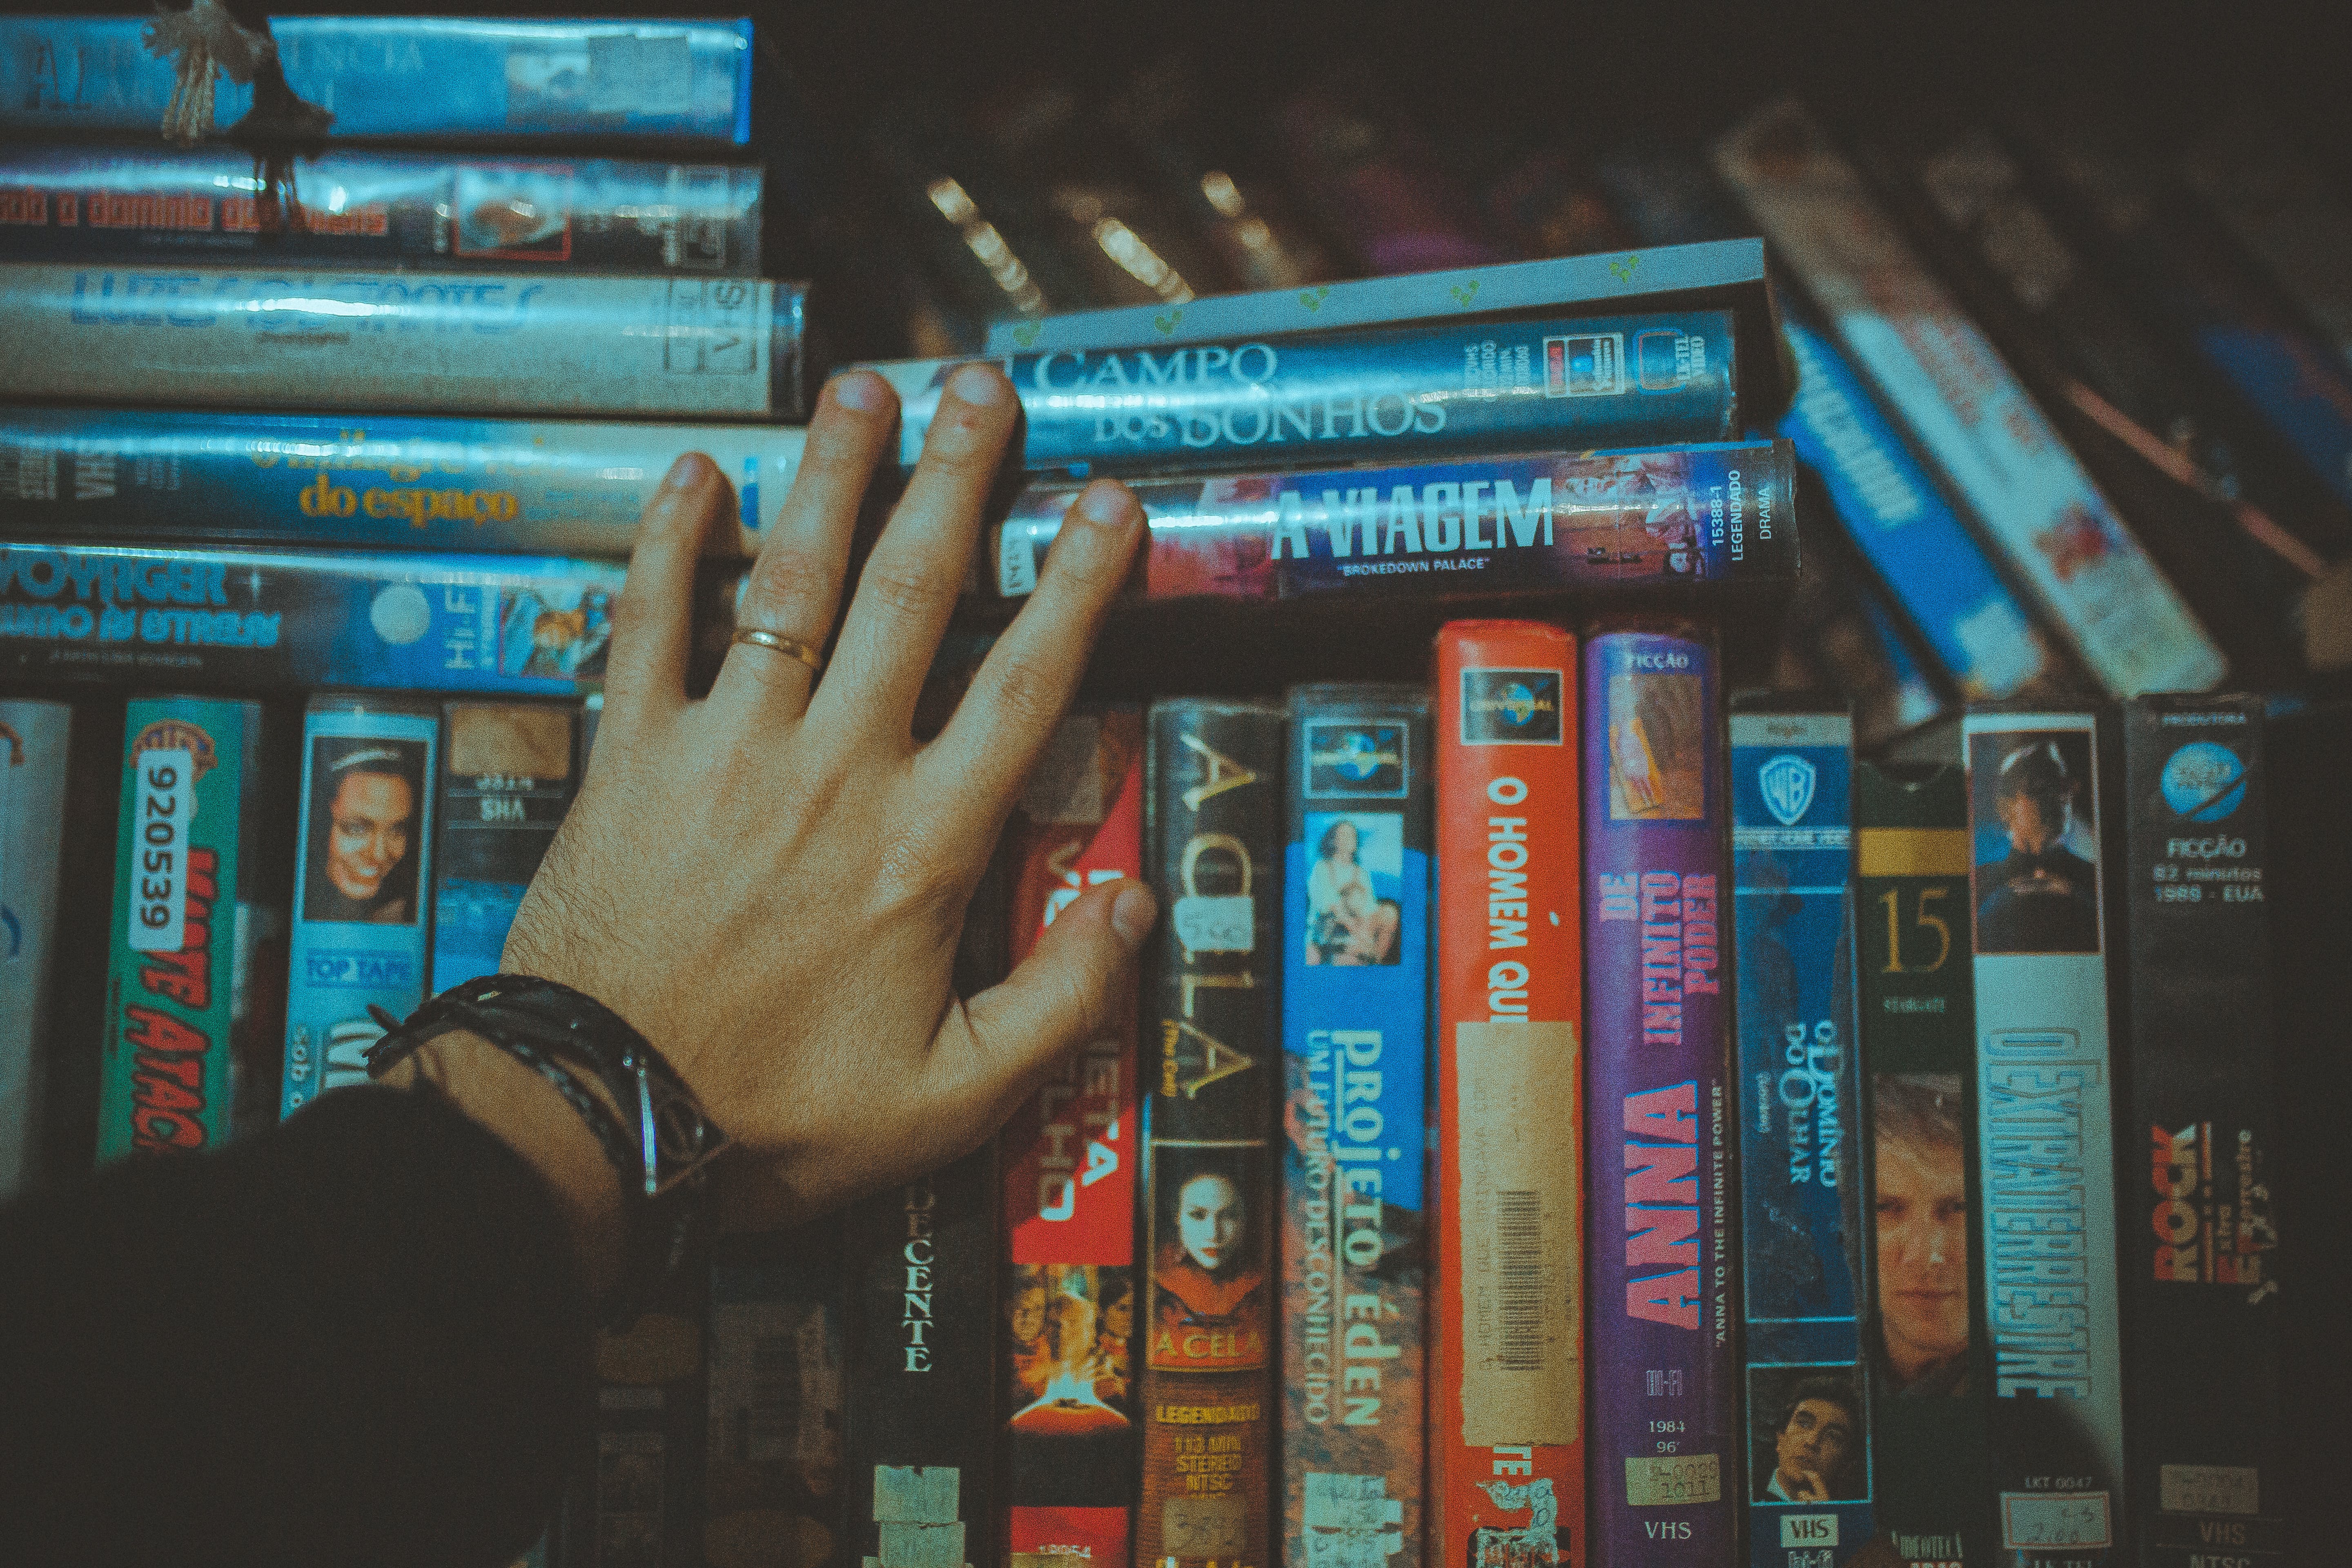 A hand searches fora  movie on a shelf of DVDs